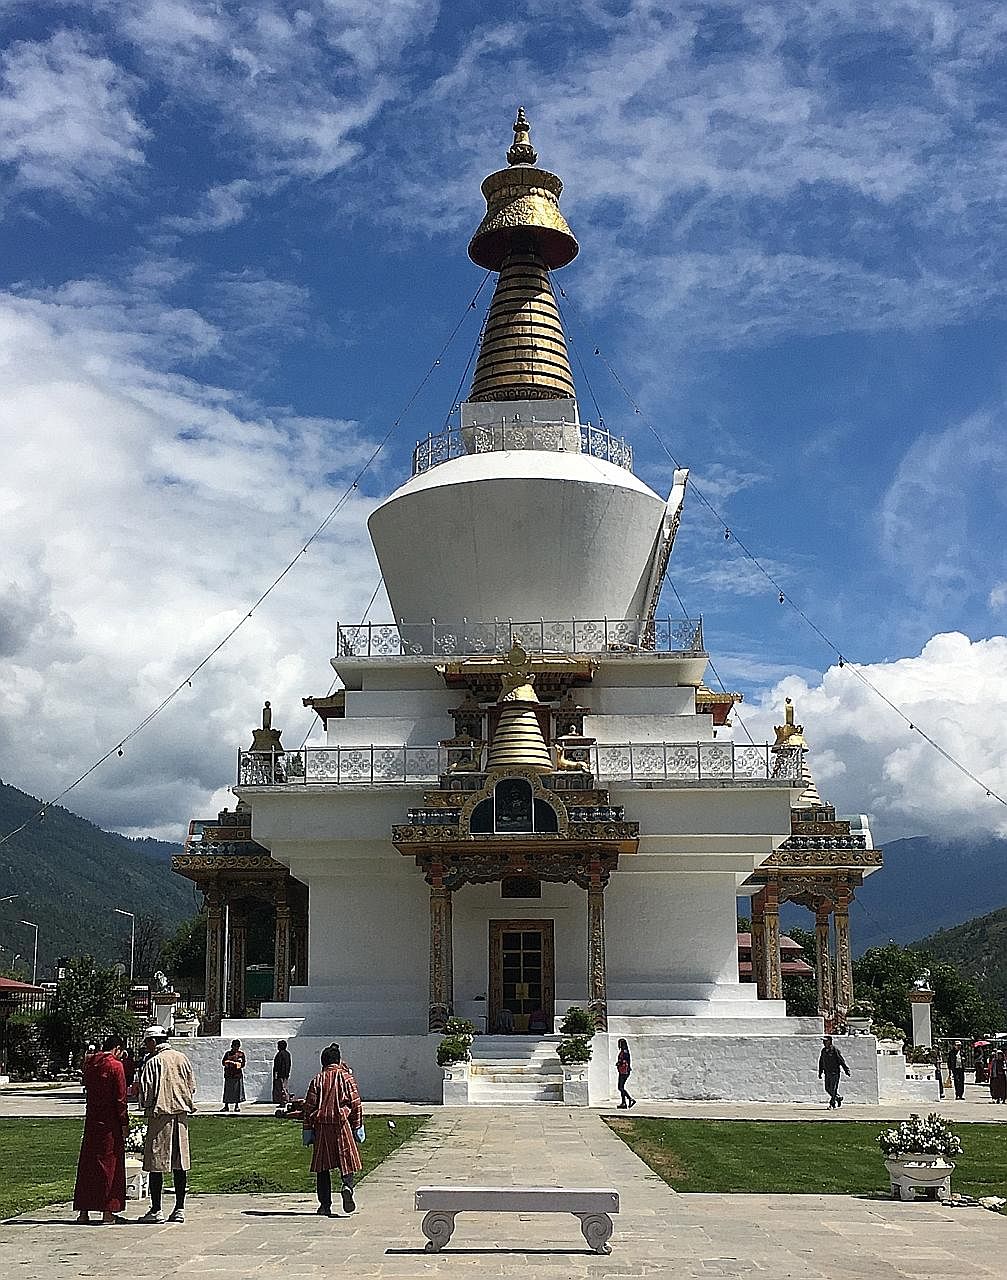 Tiger's Nest is a monastery in Bhutan that is 3,120m above sea level. A panoramic view of Paro Valley. The market in Phobjikha (above) and the Thimphu Memorial Stupa (left).